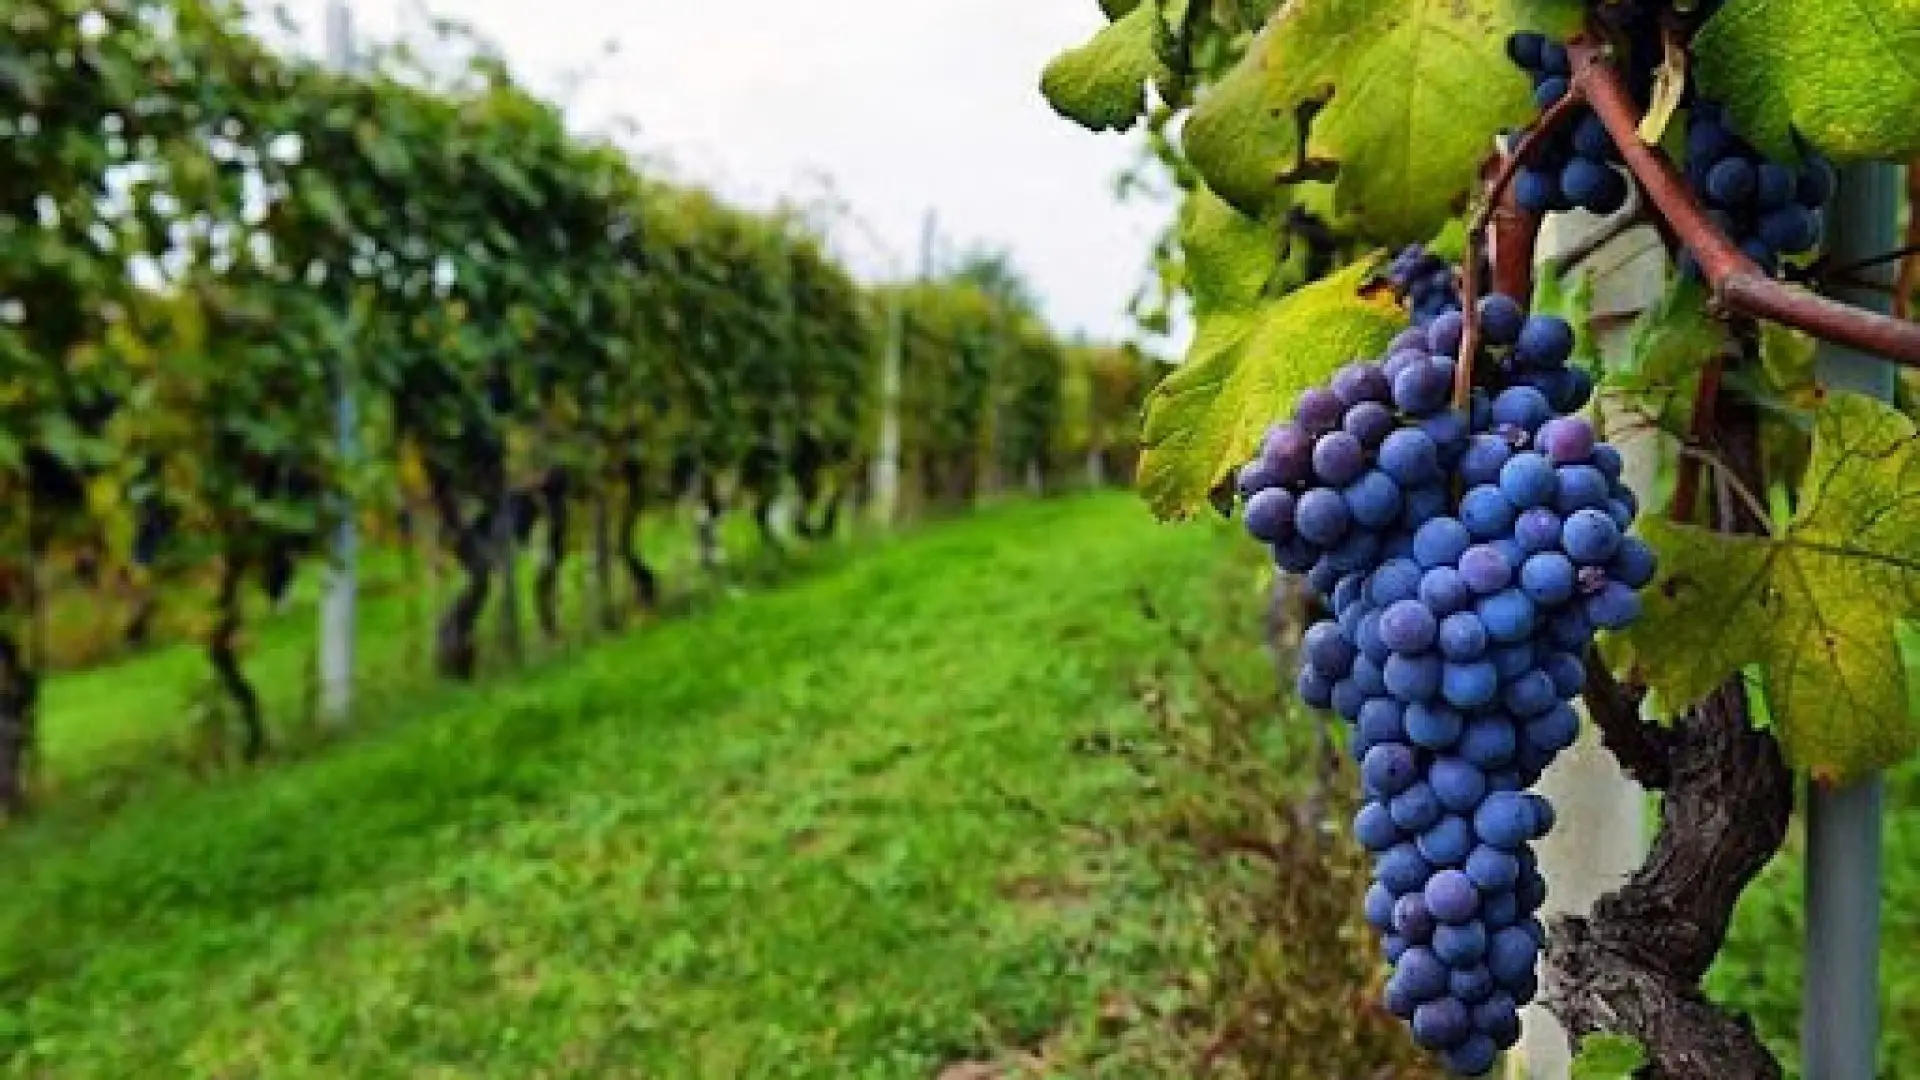 Georgia's Grape-Growing Regions and the Influence of Weather